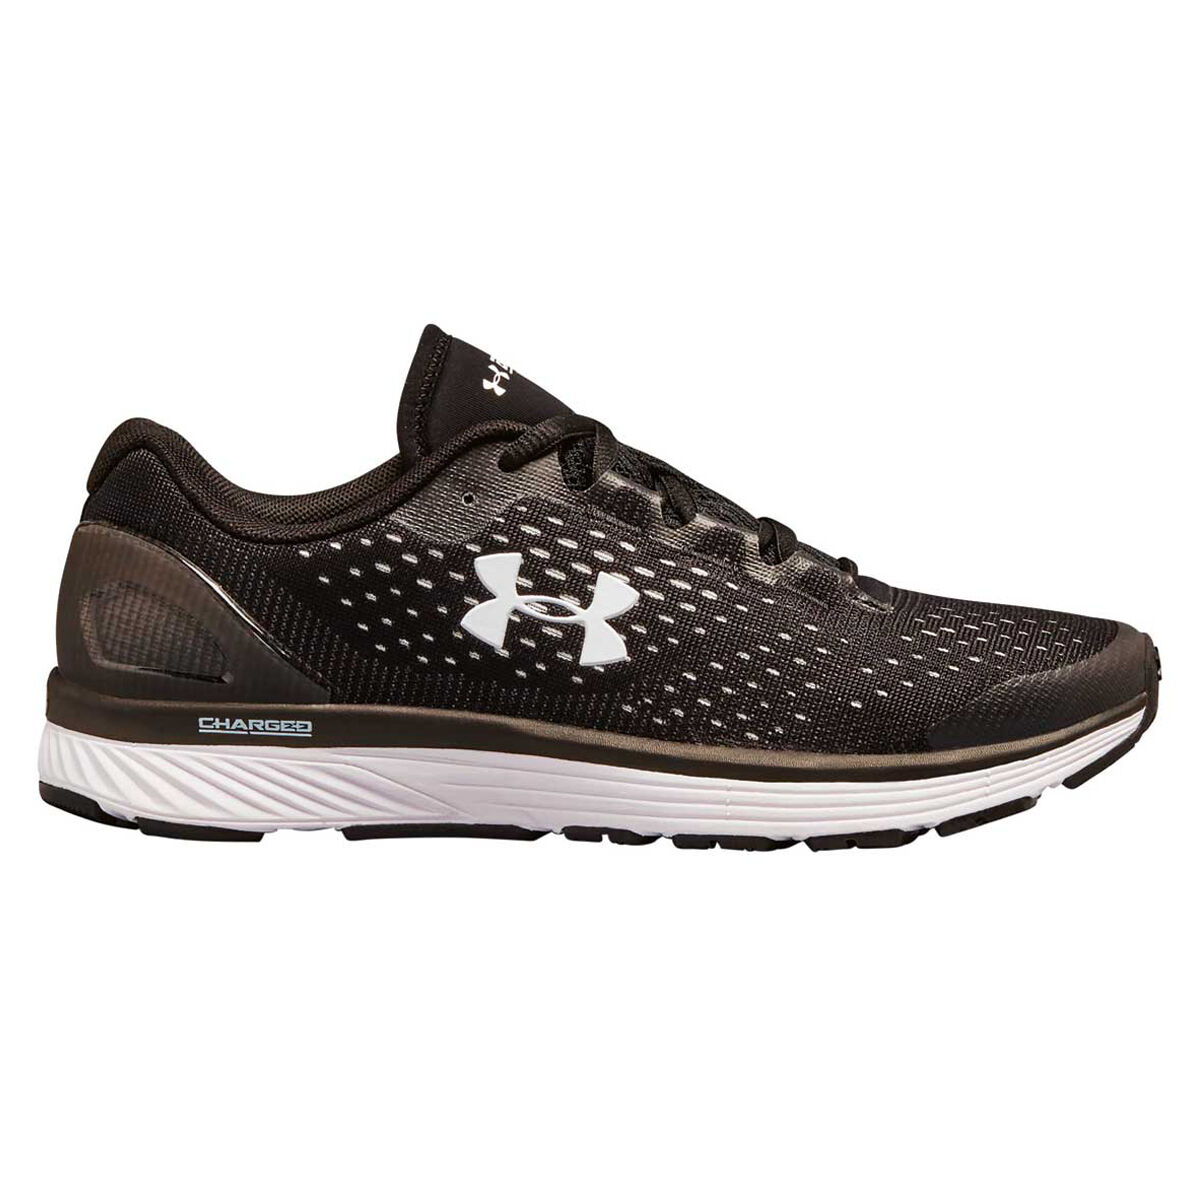 Under Armour Charged Bandit 4 Womens 